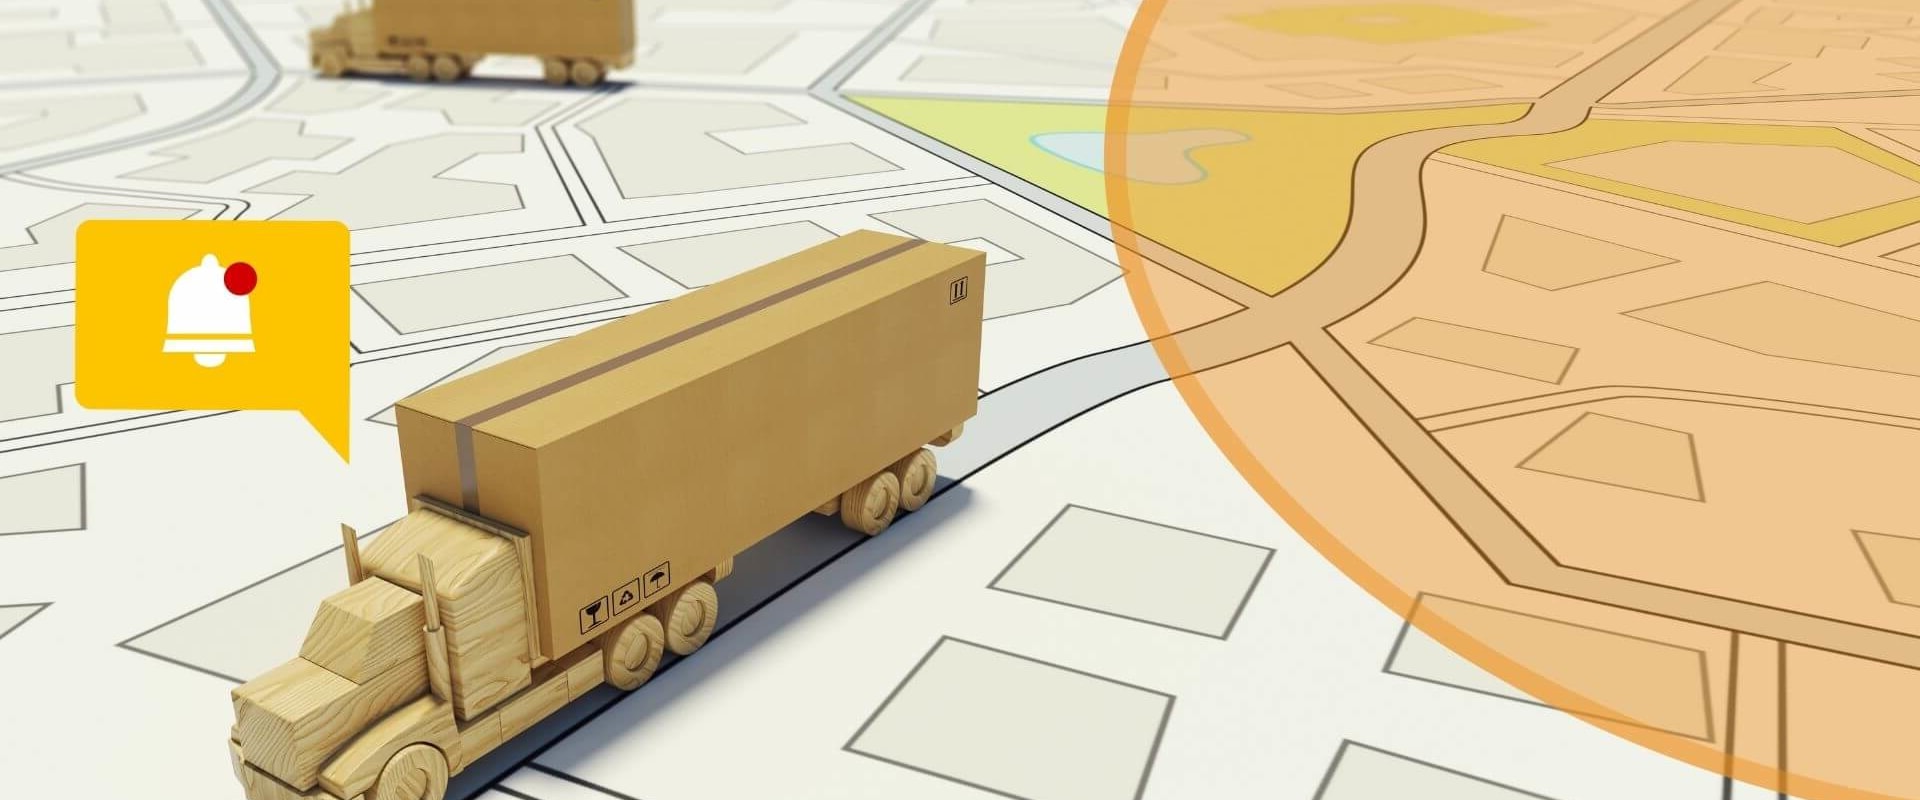 Geofencing for Enhanced Security: How It Can Optimize Trucking Operations